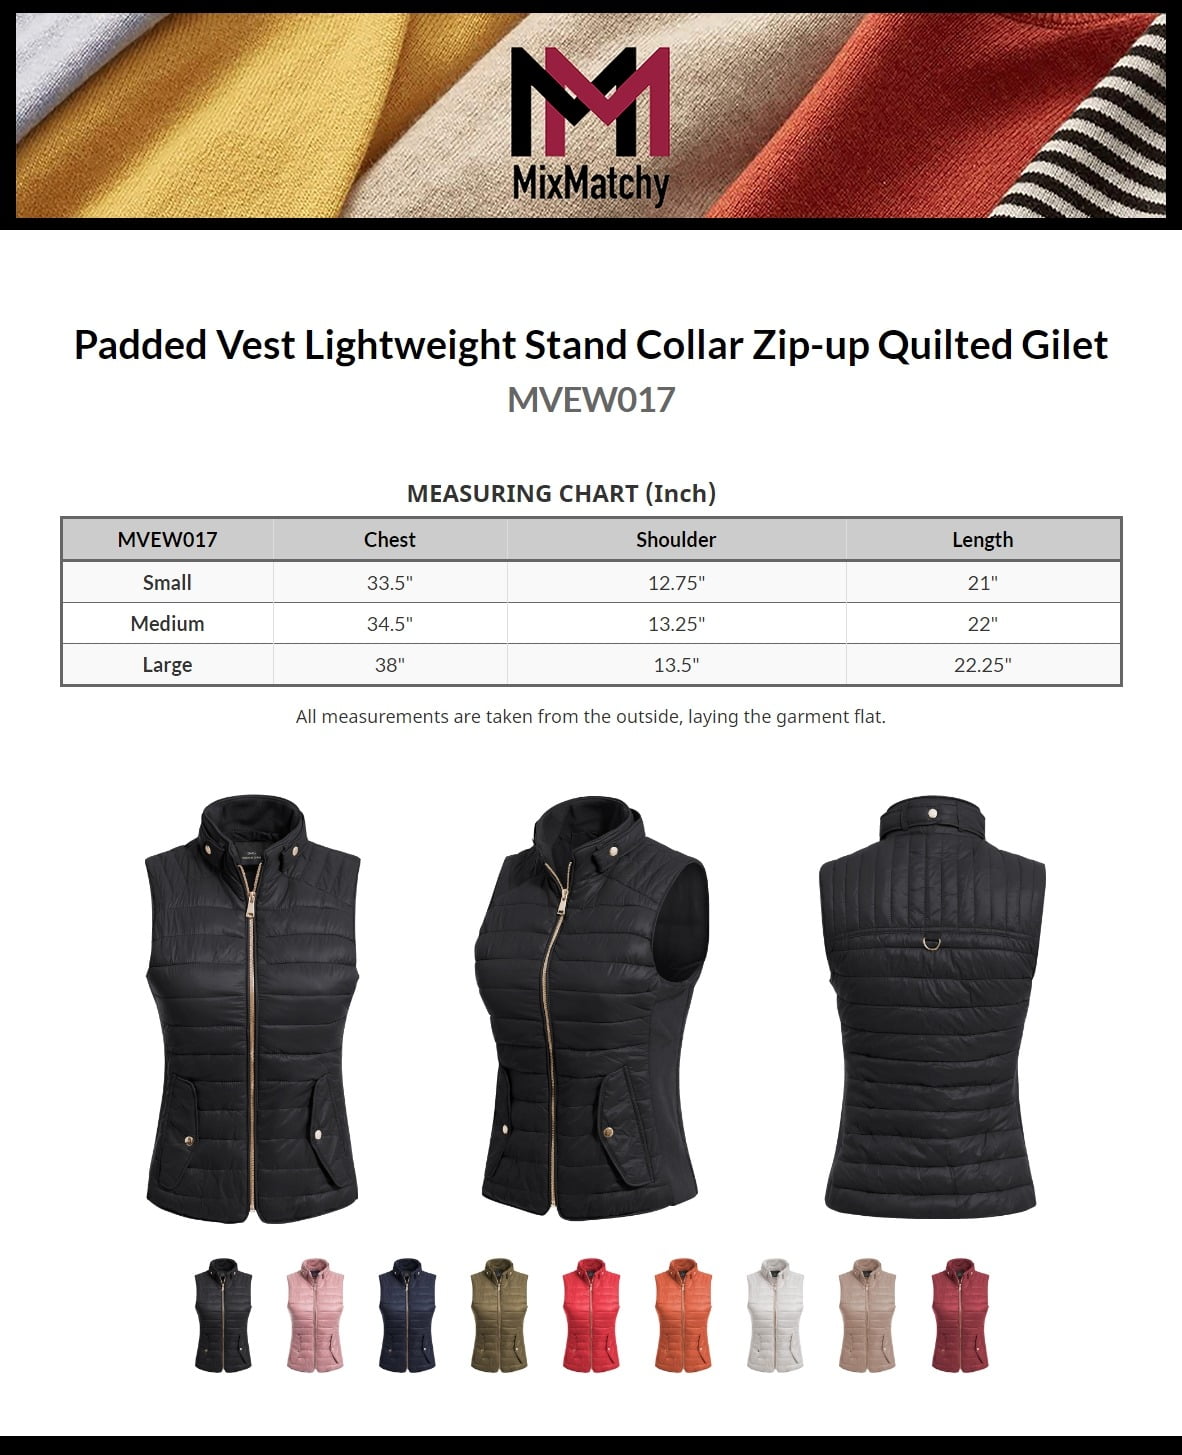 MixMatchy Women's Padded Vest Lightweight Stand Collar Zip-up Quilted Gilet